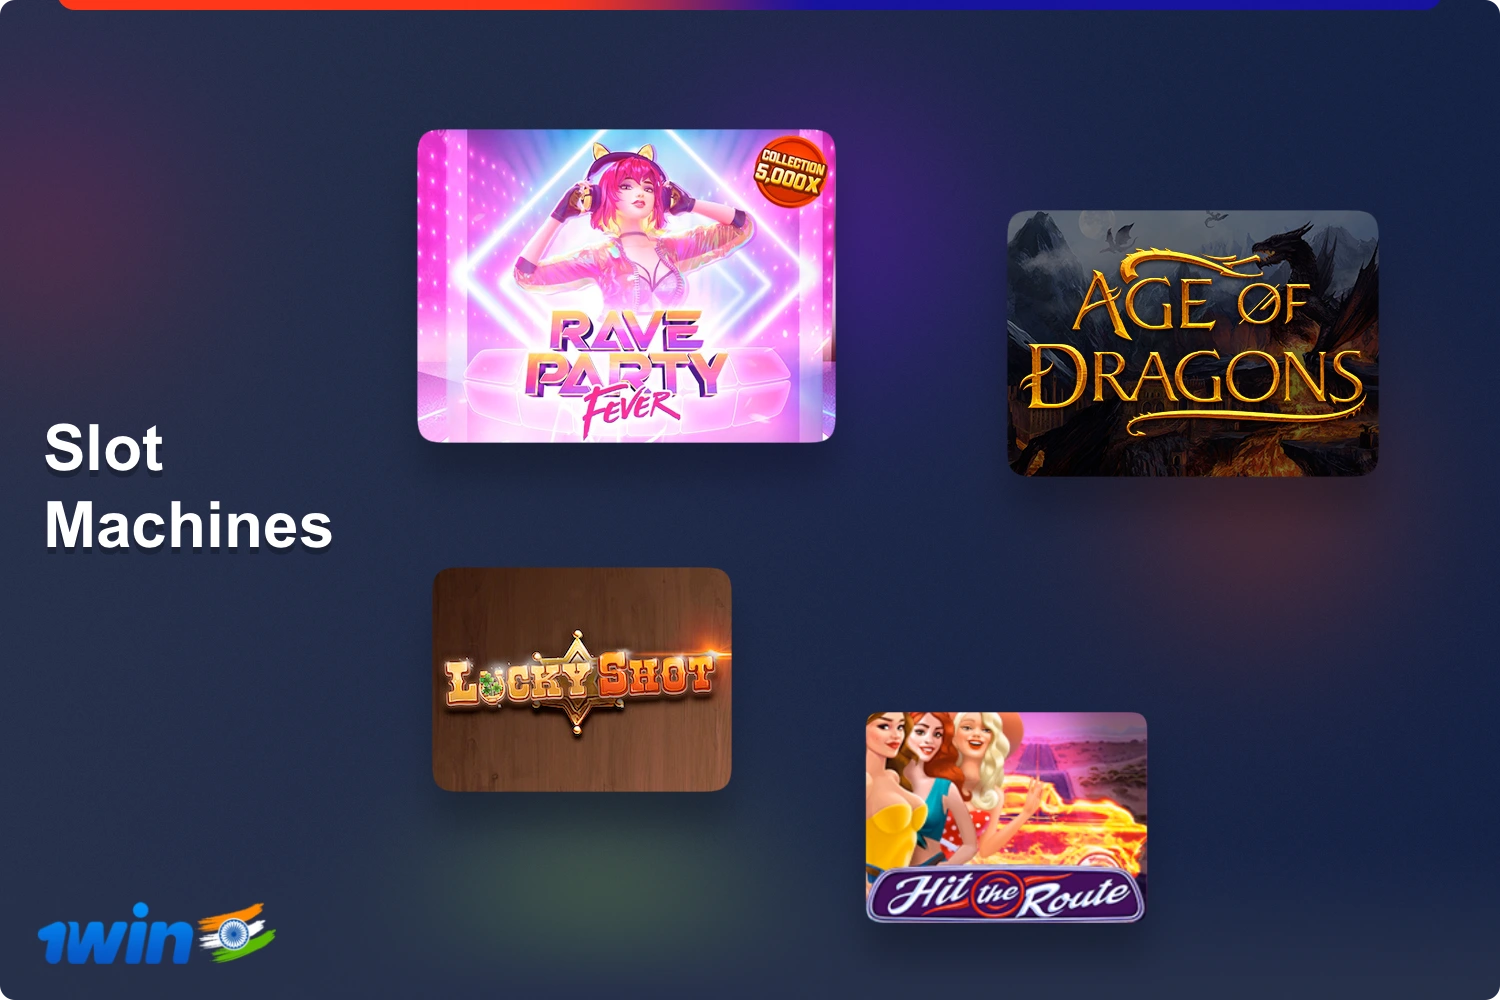 Gaming slots in the casino 1win is the most popular entertainment among players from India